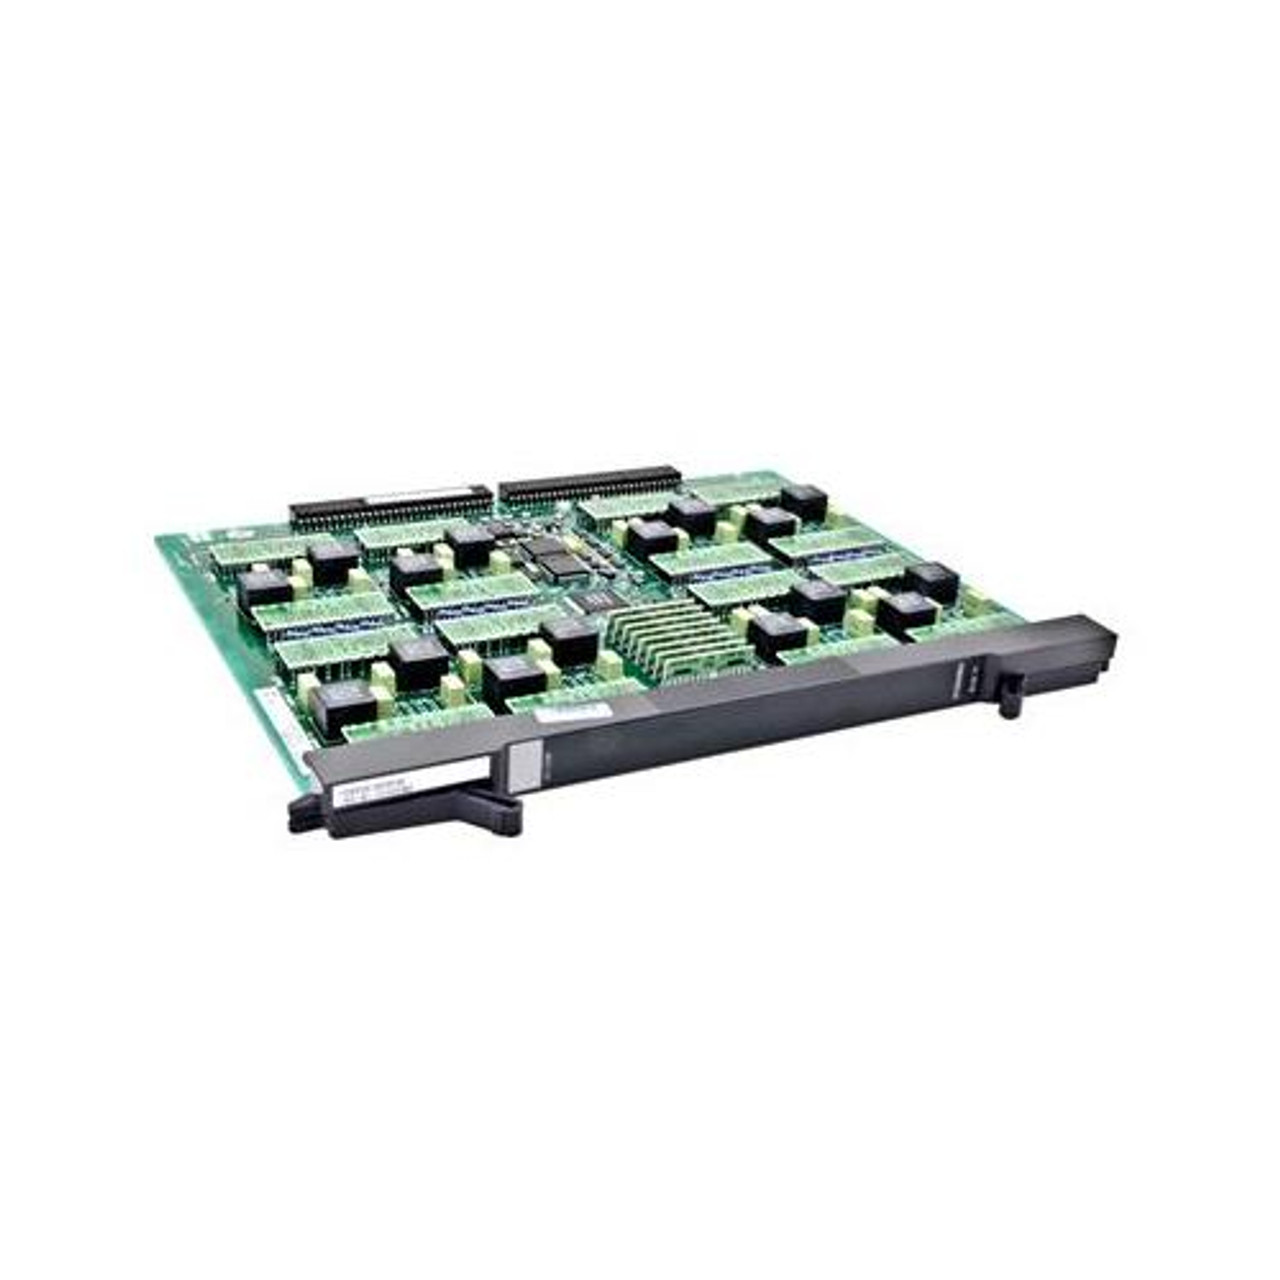 150223 NEC Pn-8dlcp 8-Ports Digital Station Card for Neax 2000